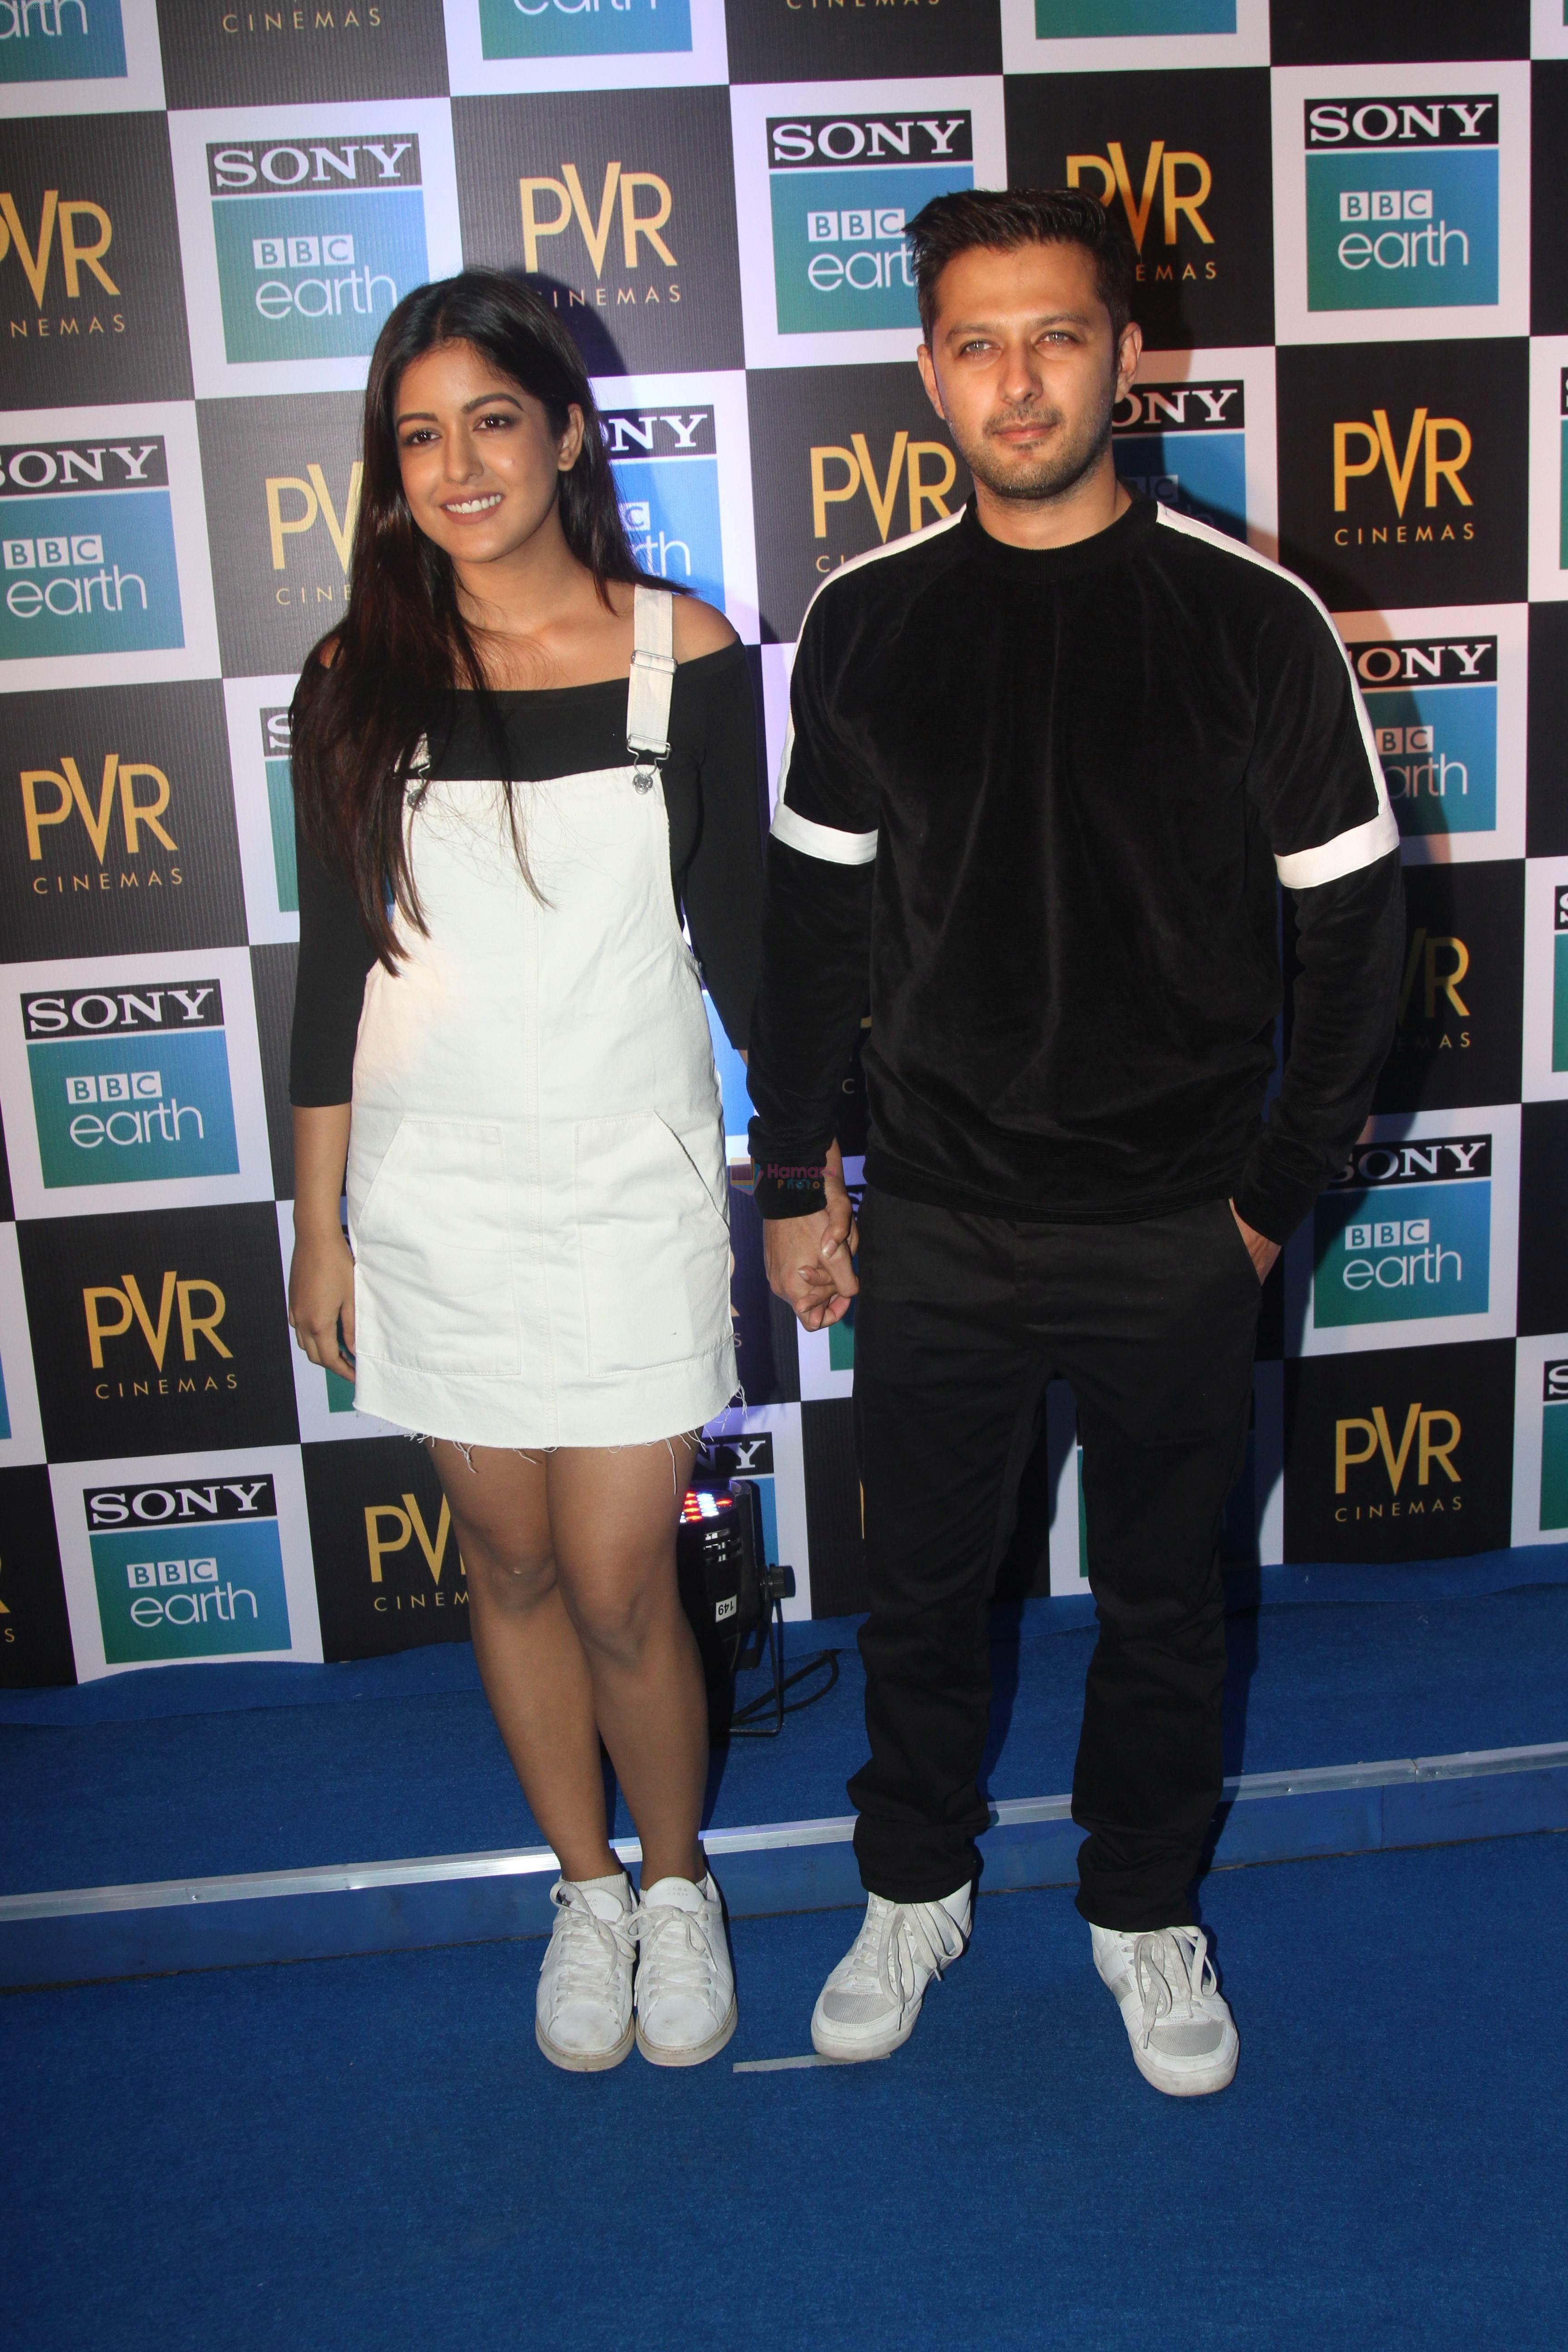 Vatsal Seth at the Screening of Sony BBC Earth's film Blue Planet 2 at pvr icon in andheri on 15th May 2018